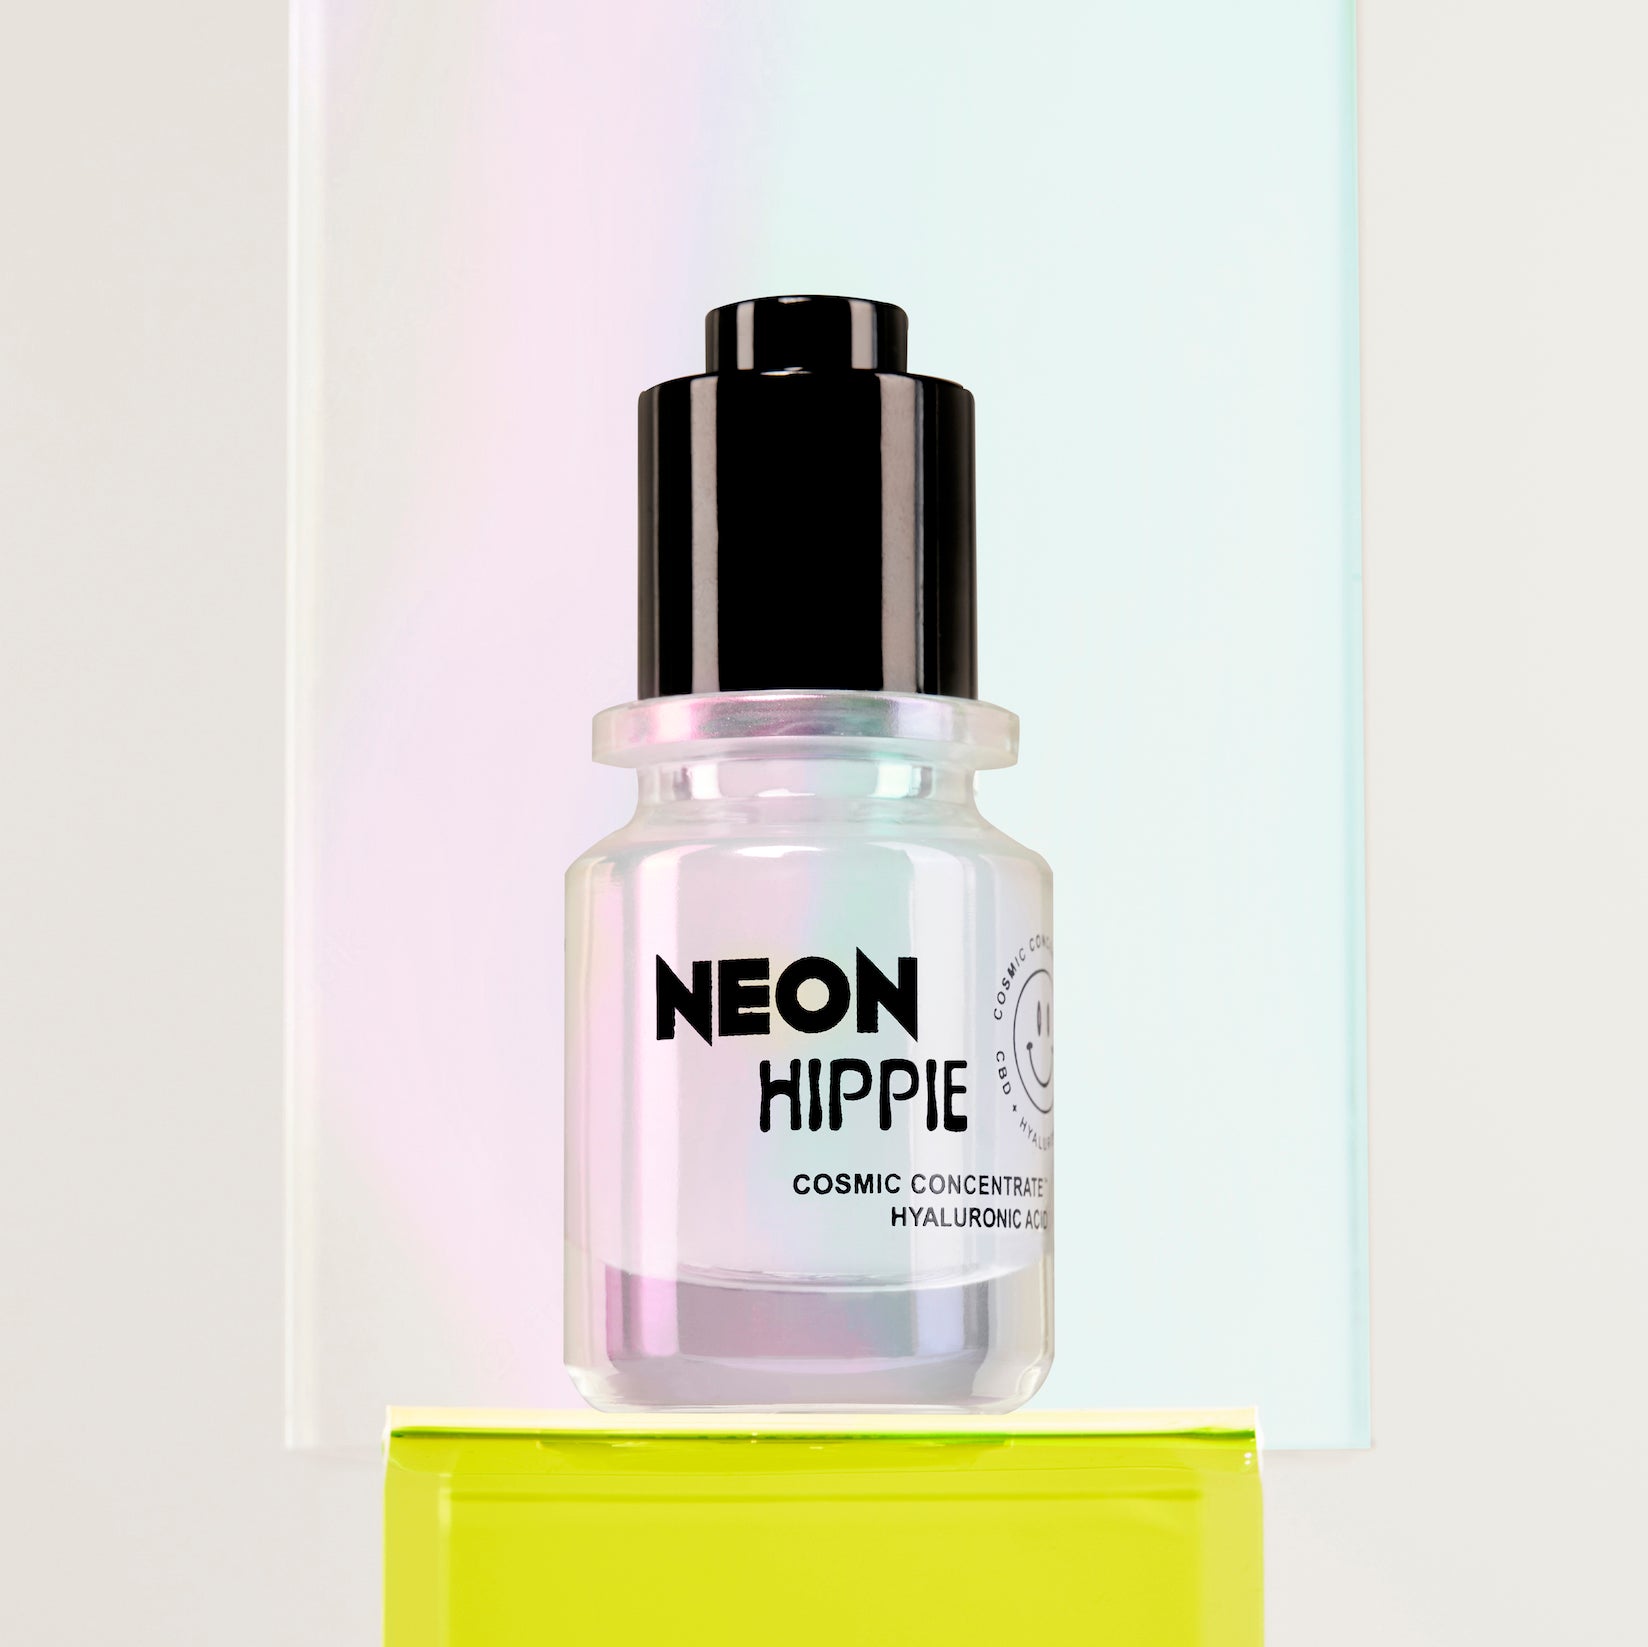 NEON HIPPIE COSMIC CONCENTRATE™ - Multiverse